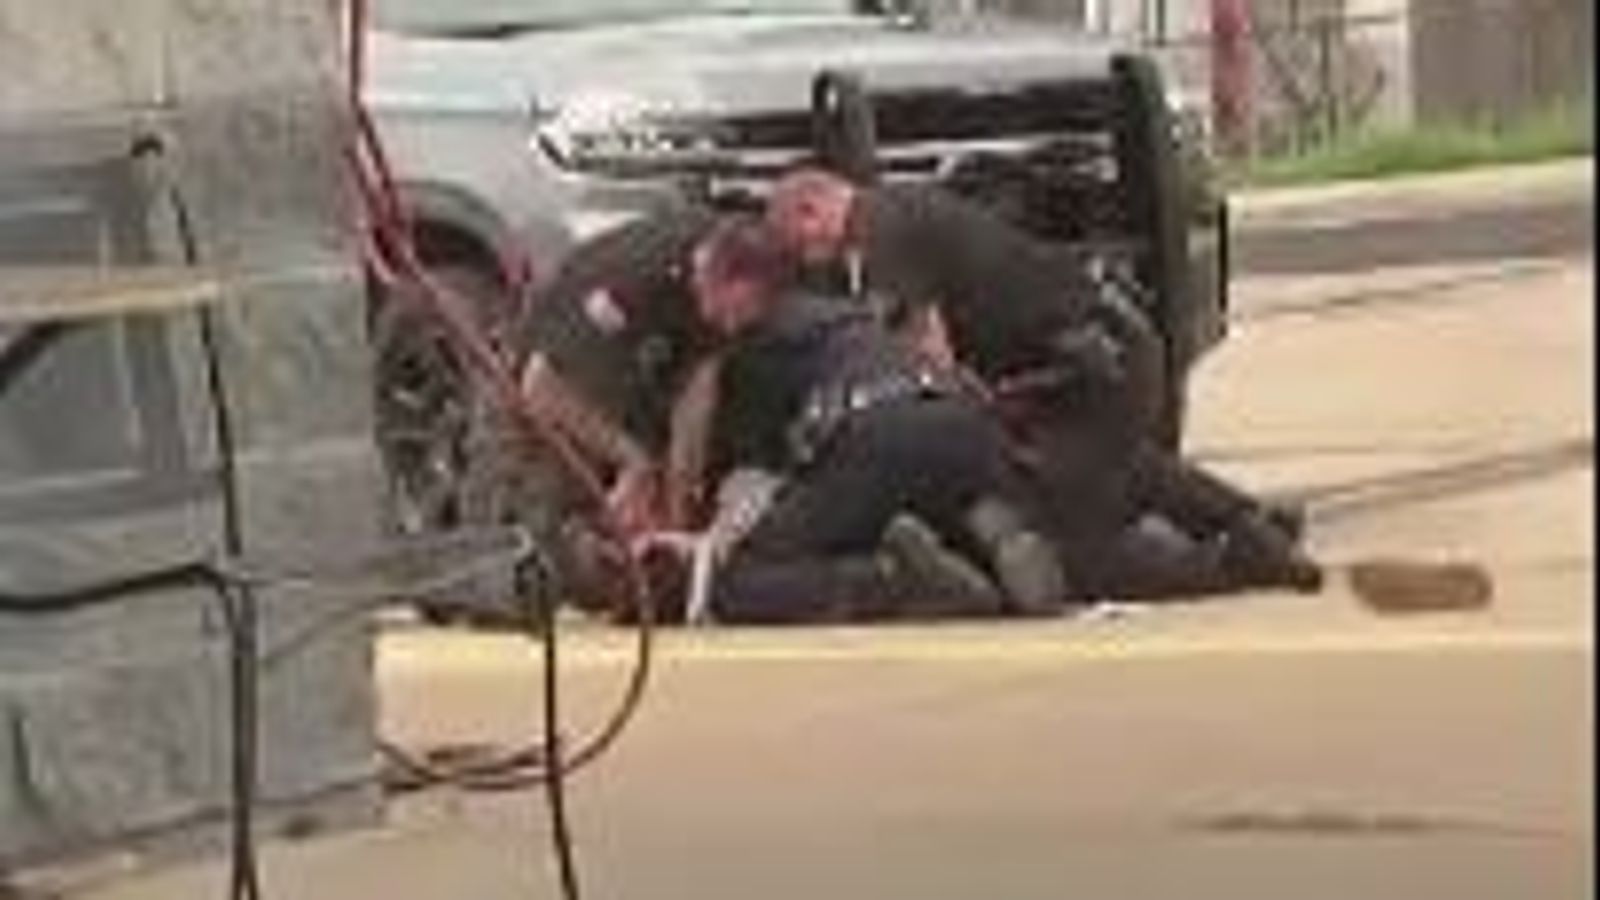 Arkansas Three Police Officers Suspended After Video Emerges Showing Them Allegedly Striking A 